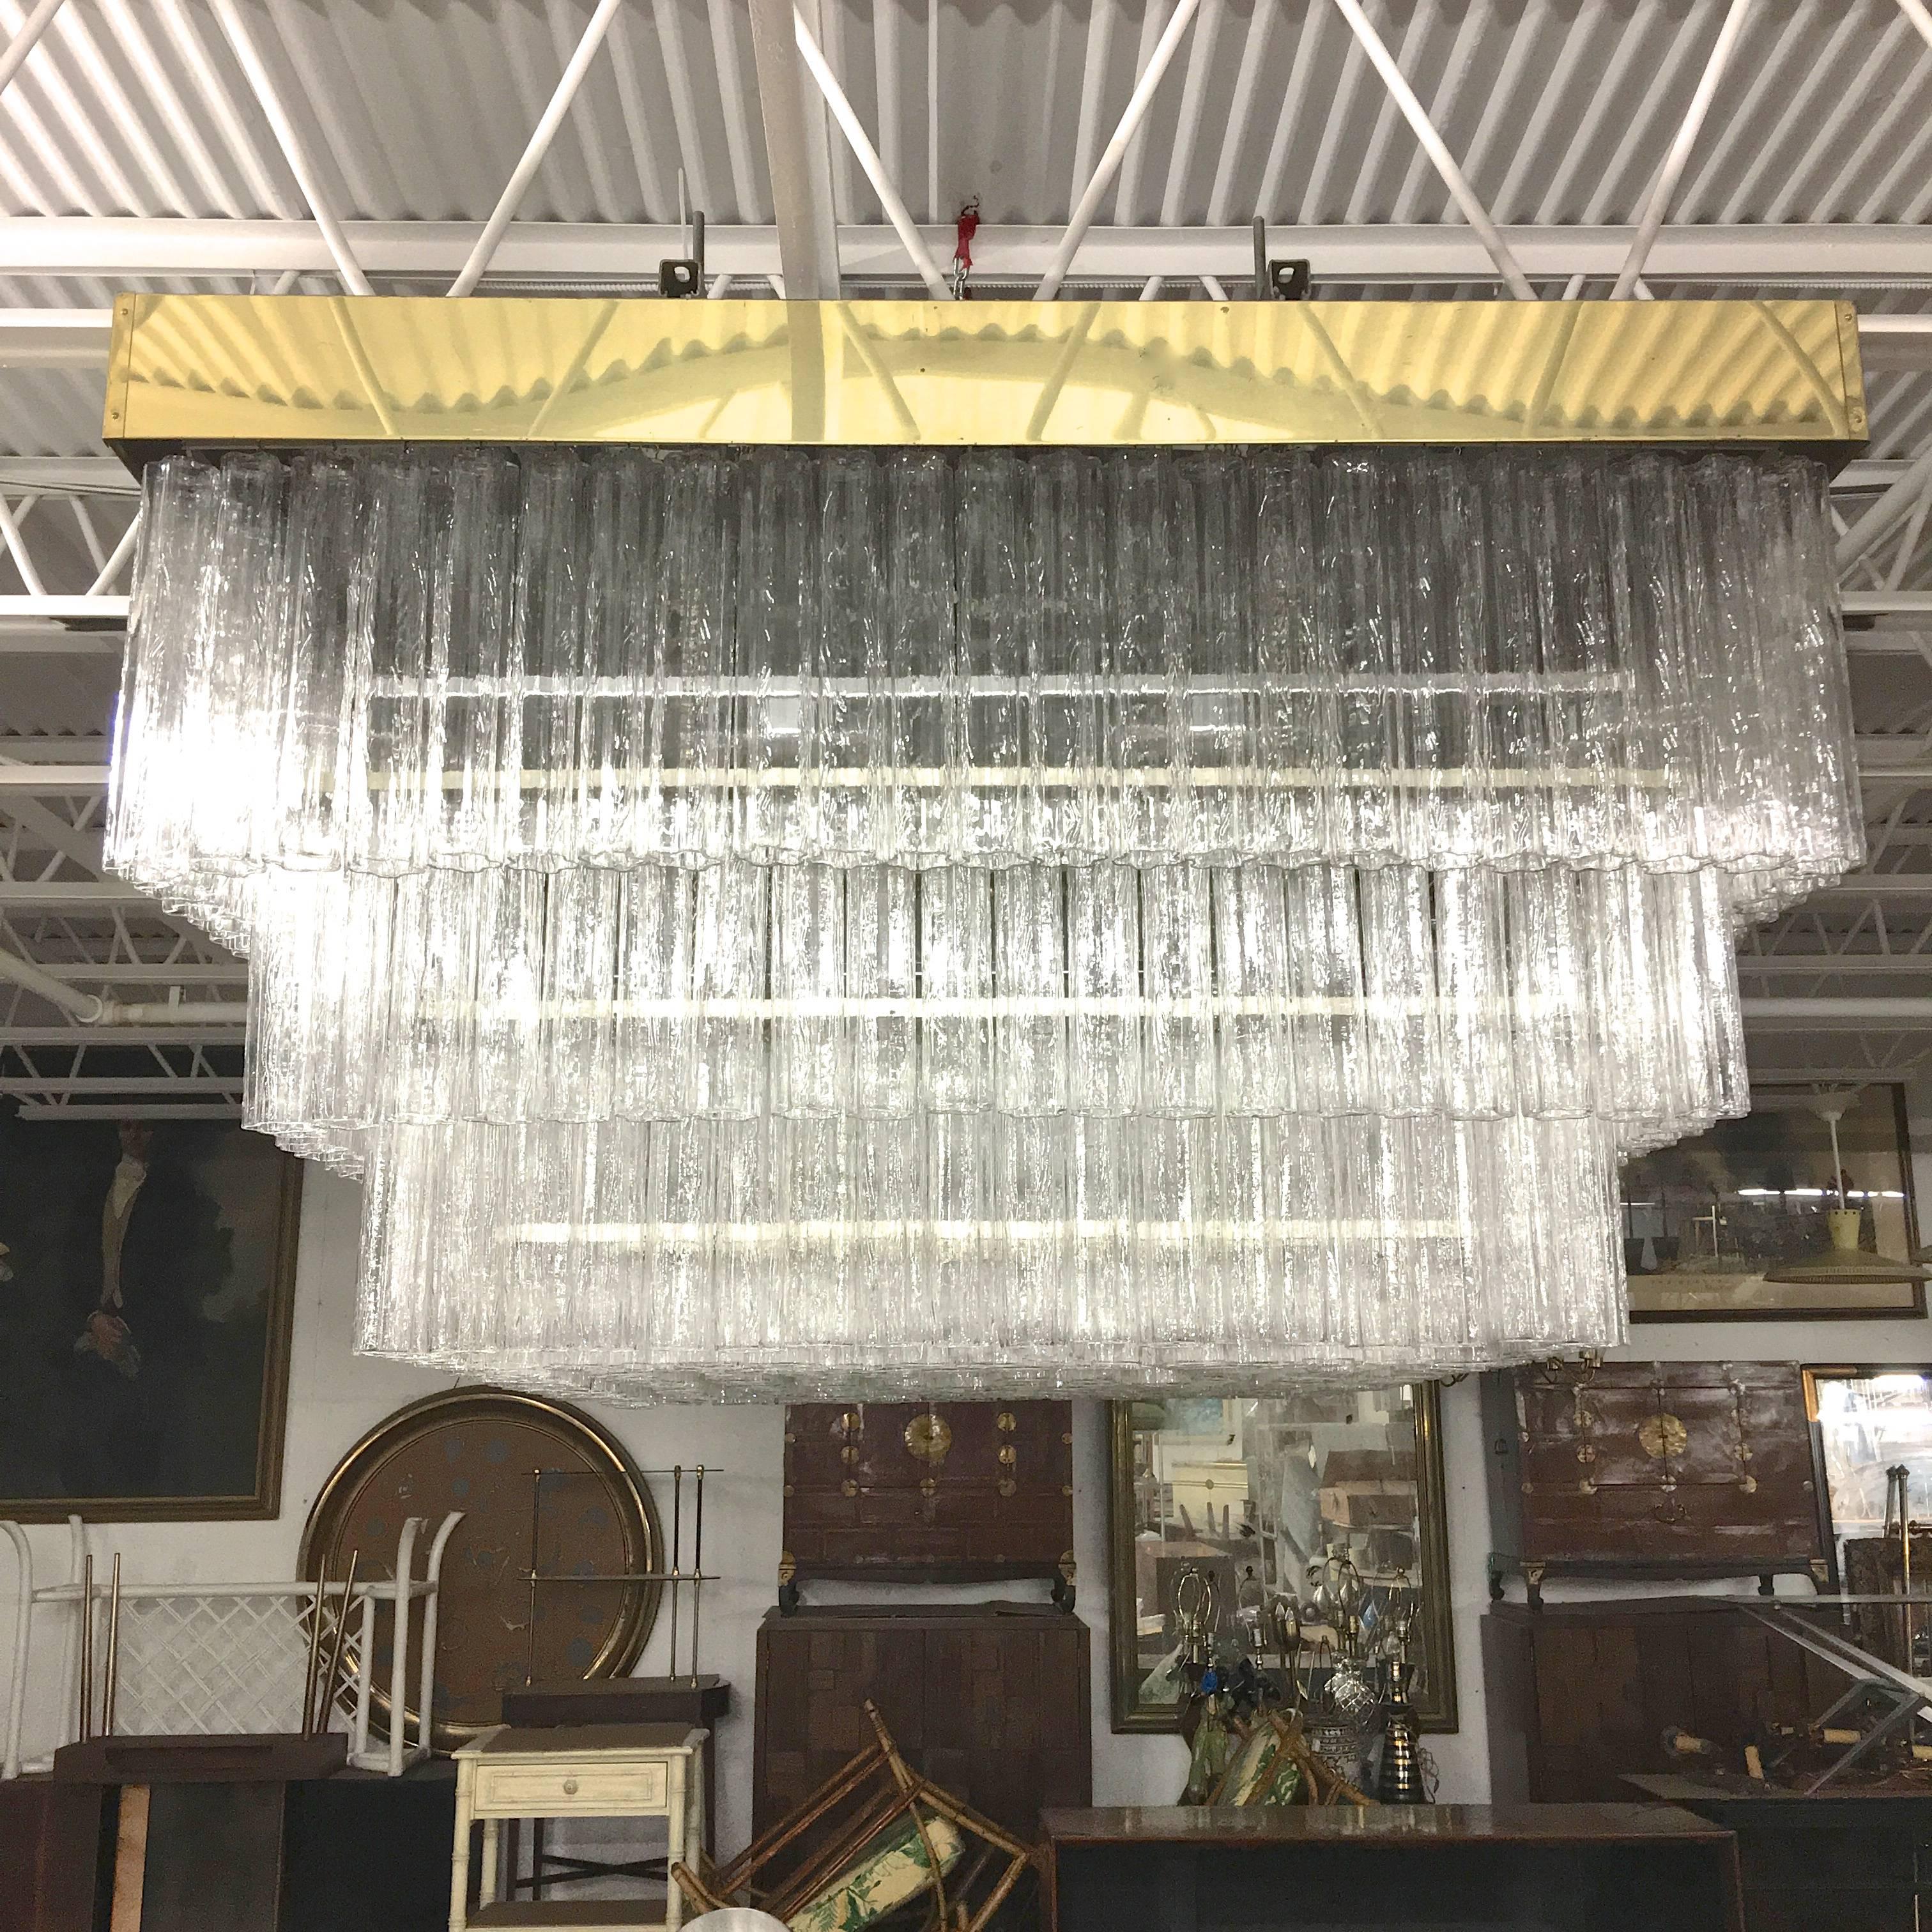 Monumental 1970s vintage Venini Tronchi crystal ceiling mounted chandelier from a Boston area hotel lobby. Six foot six inches square. Three tiers. four different size crystals. Brass banded square pan frame with mirror polished stainless steel